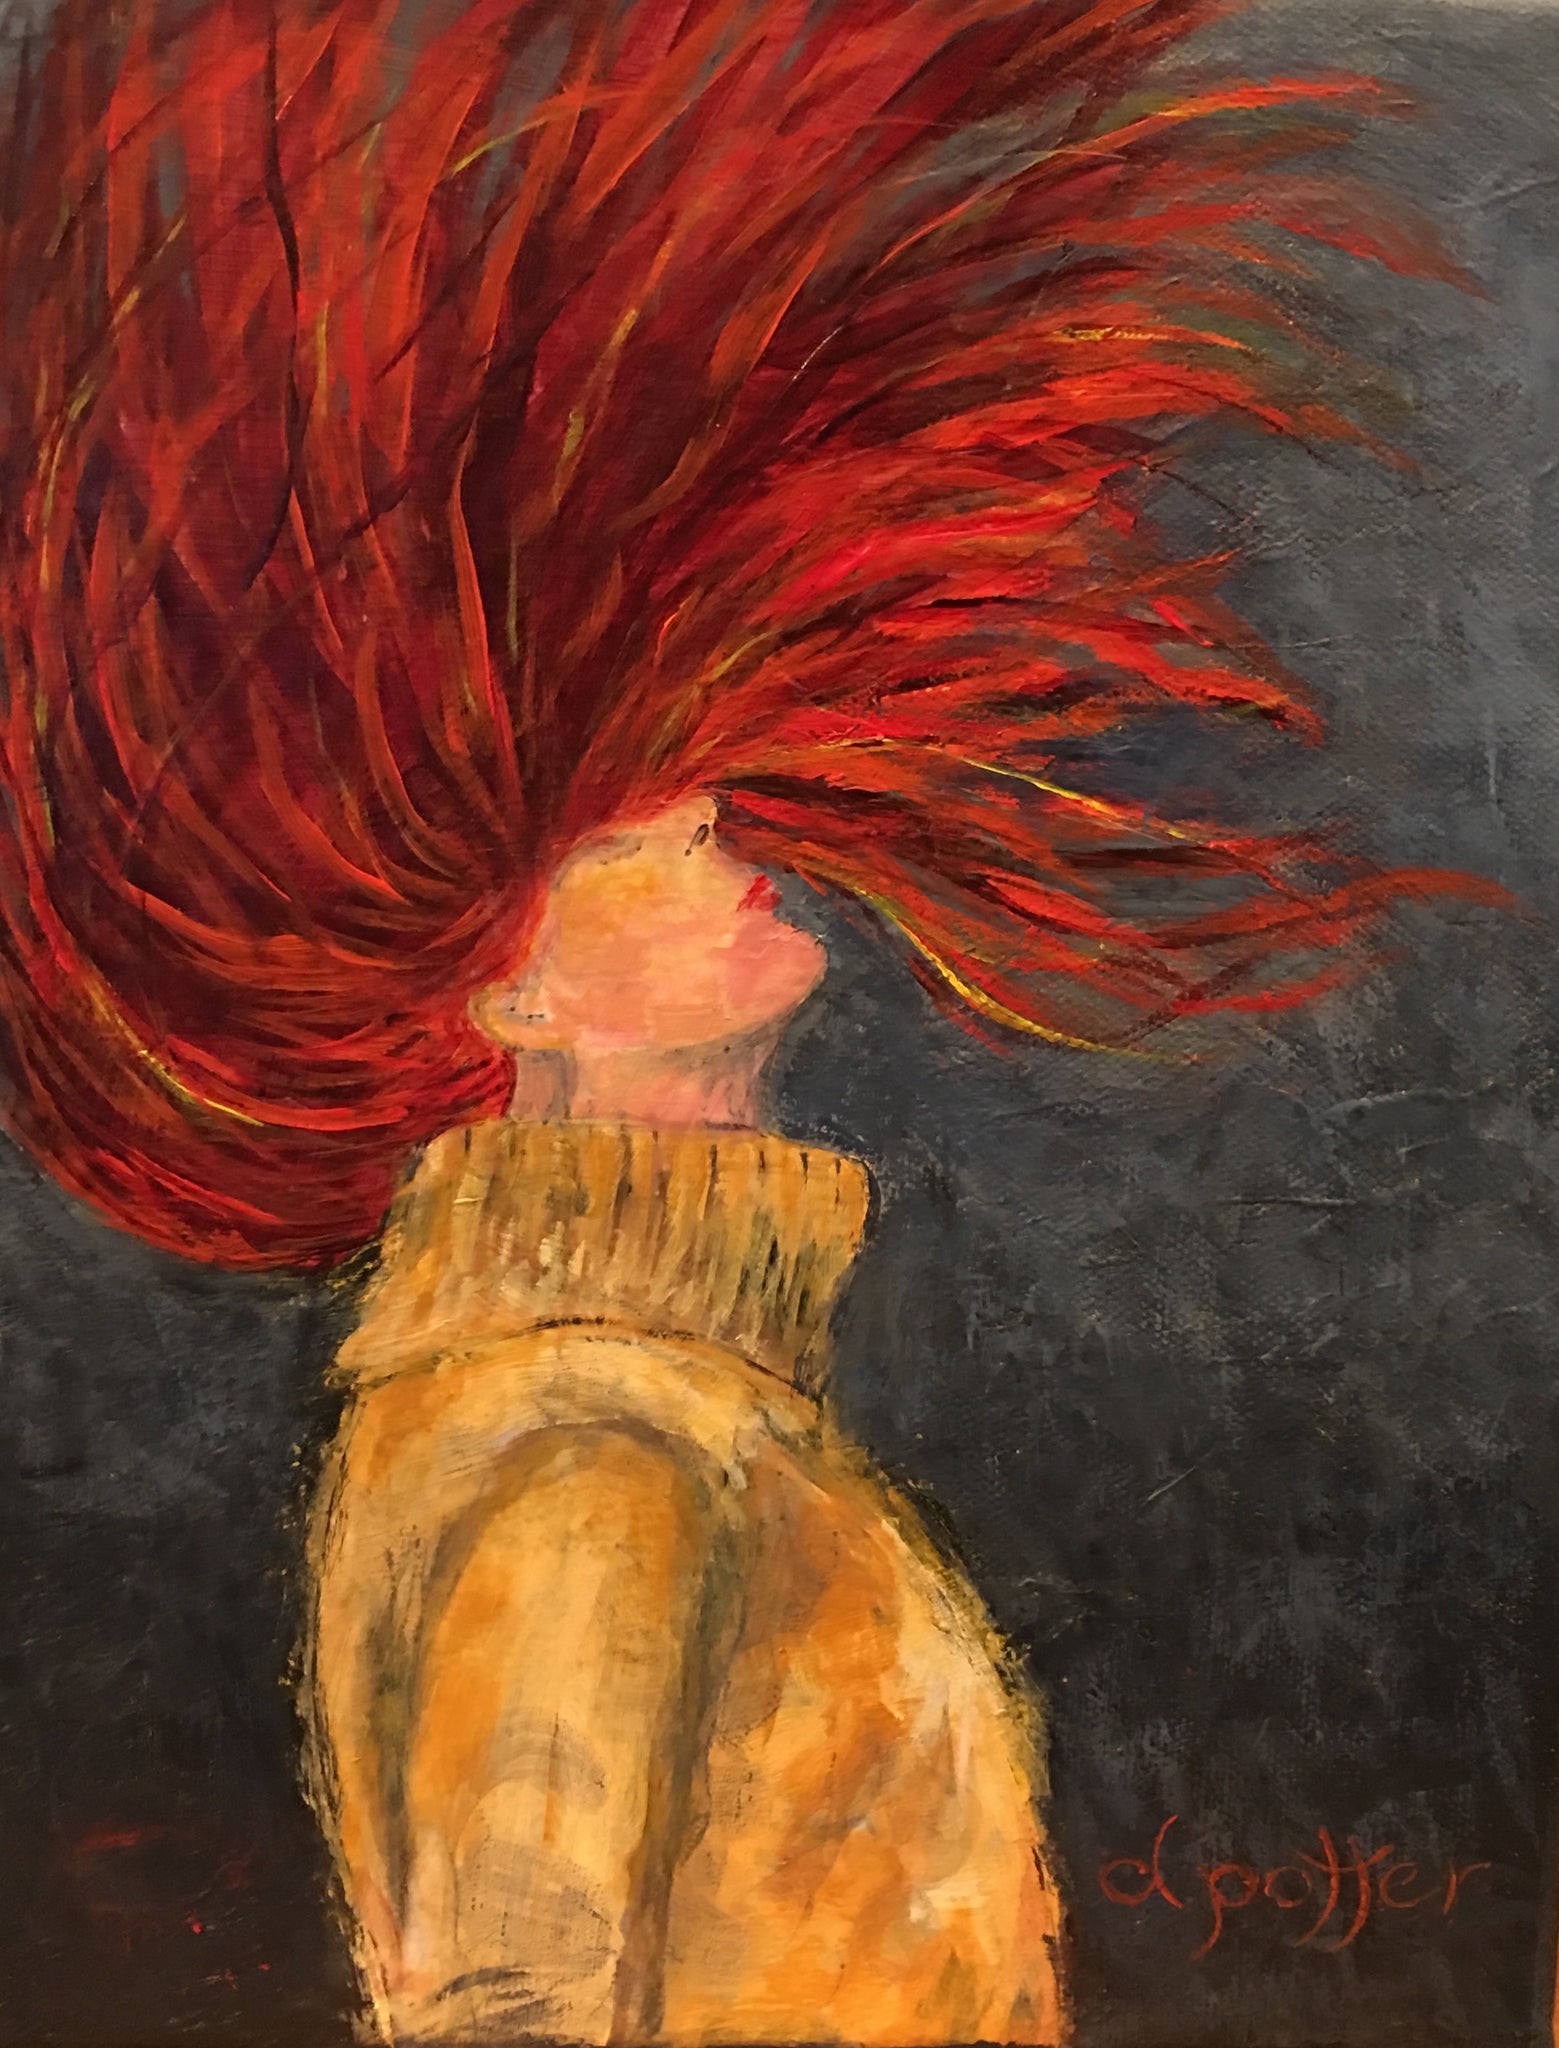 SOLD - Original Acrylic On Canvas "This Girl Is On Fire"